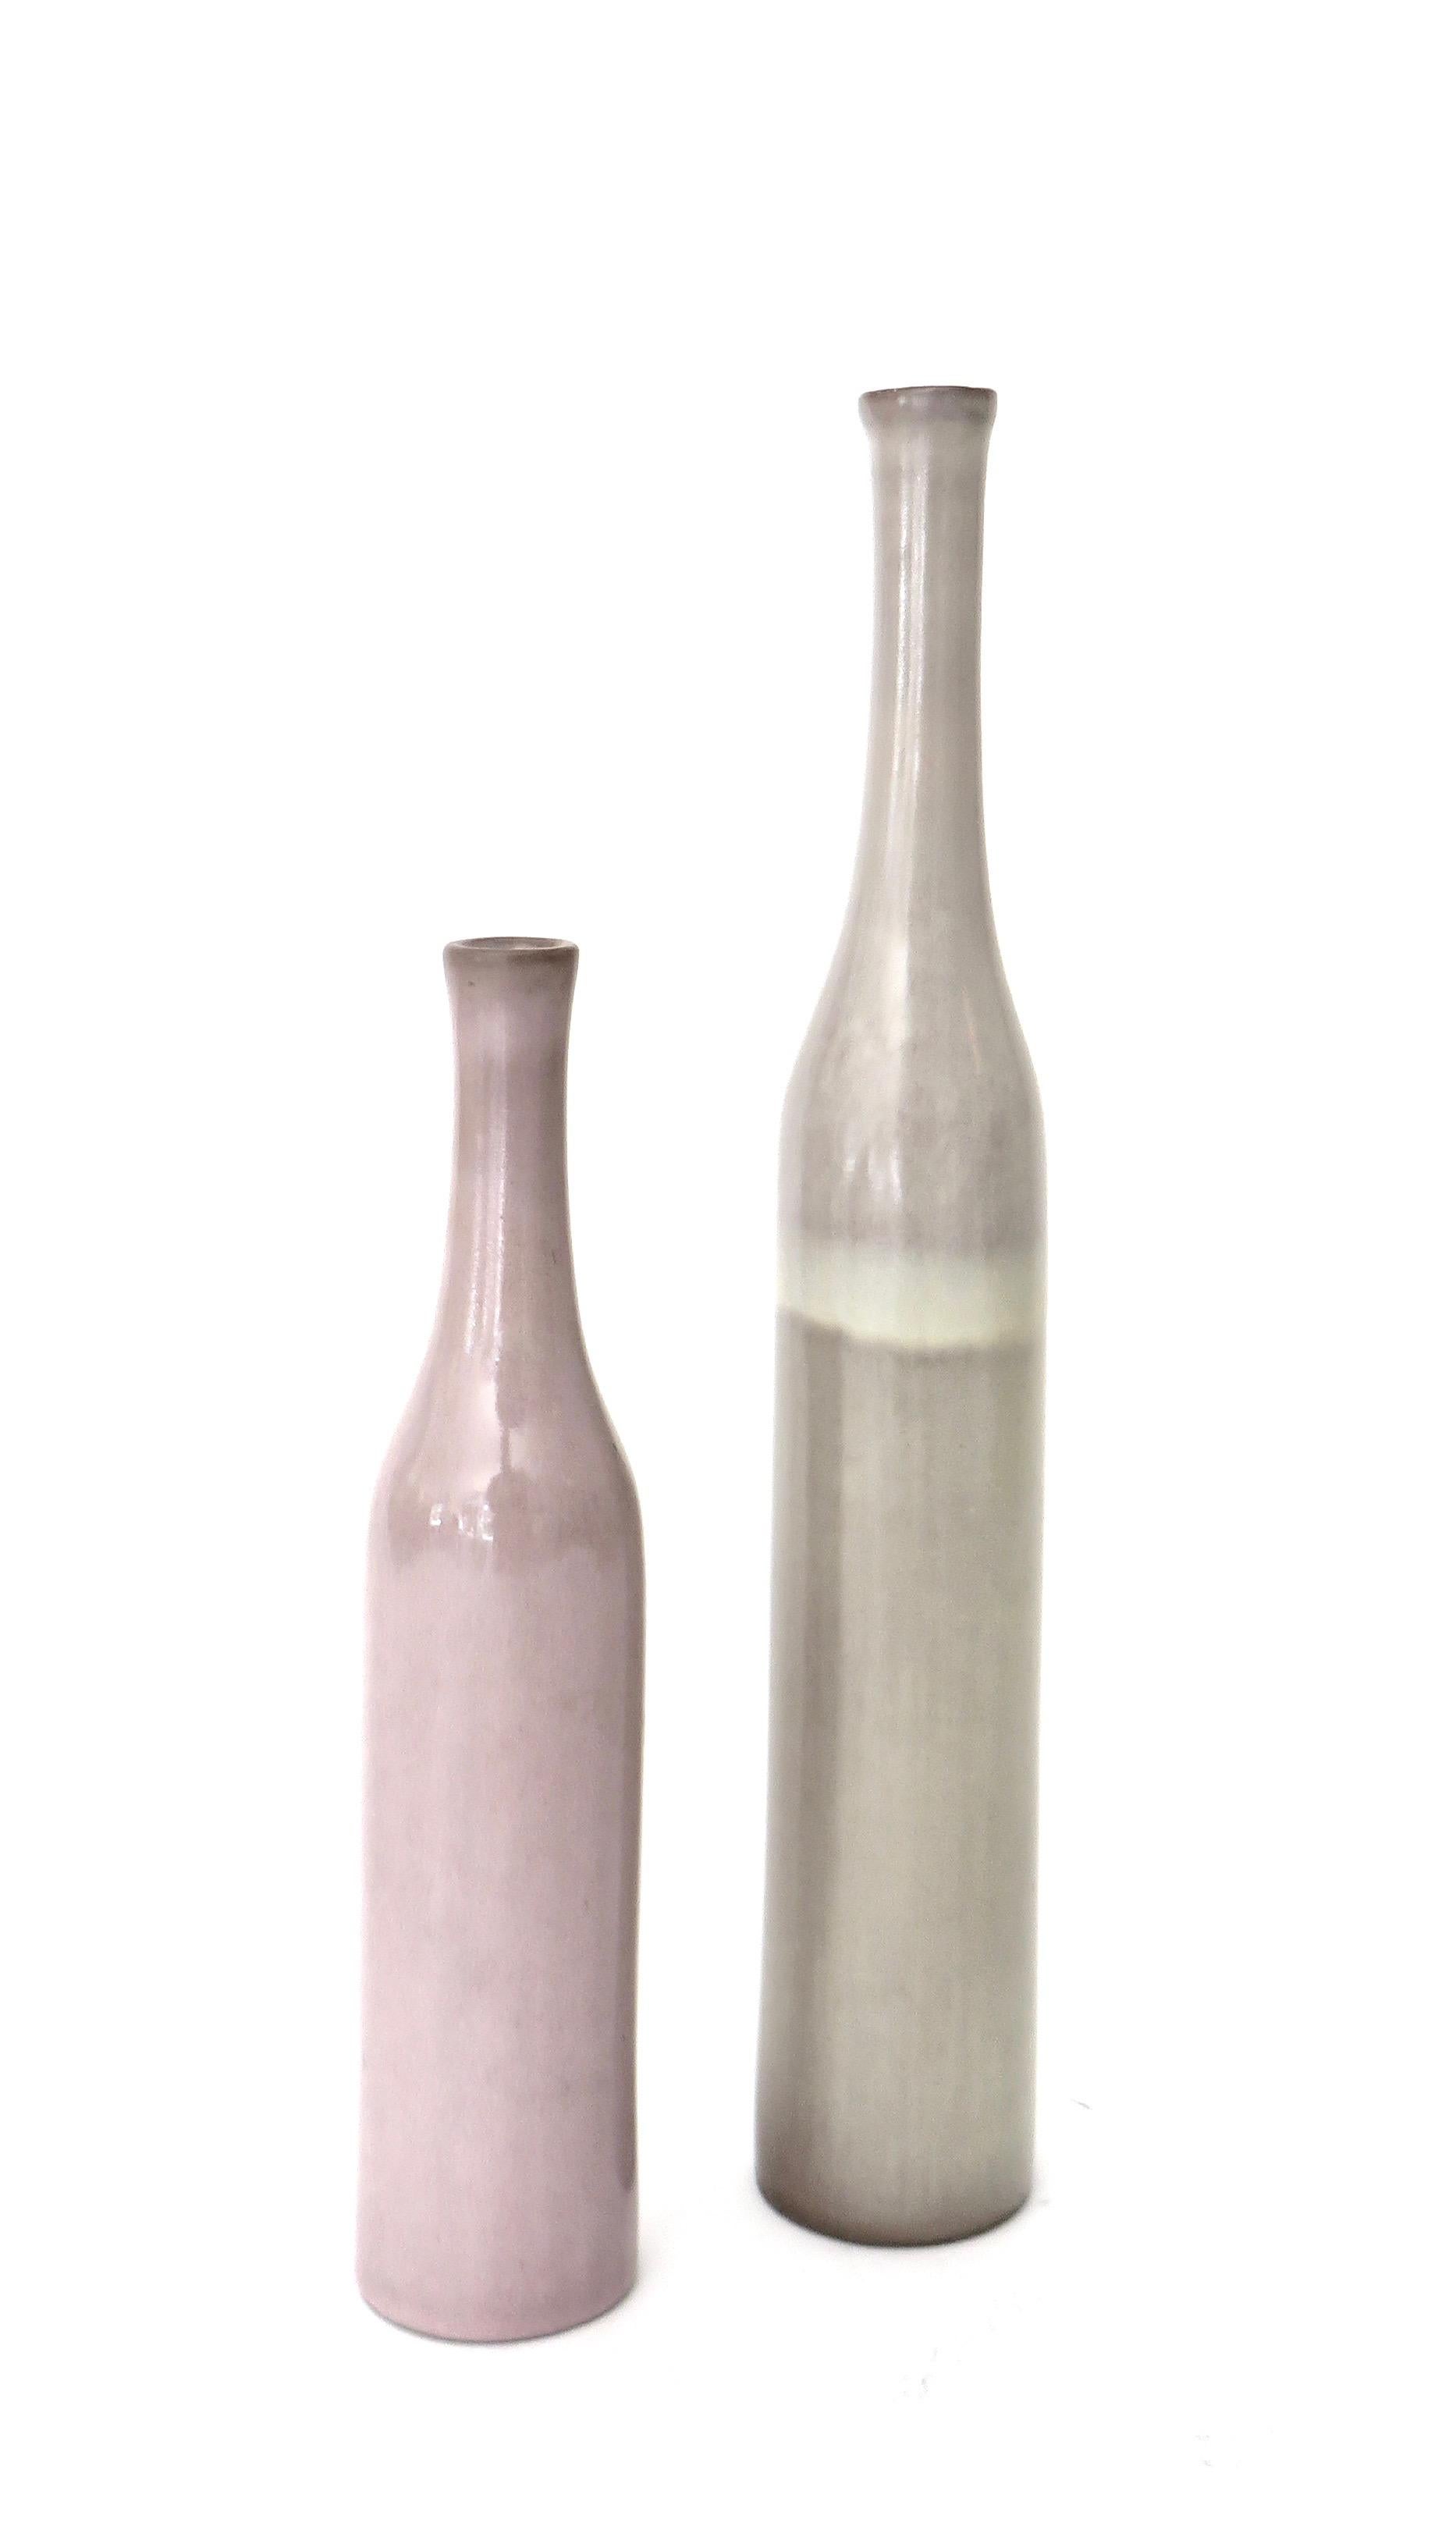 Mid-20th Century Jacques and Dani Ruelland French Ceramic Bottle In Pale Gray to Lavender Glaze